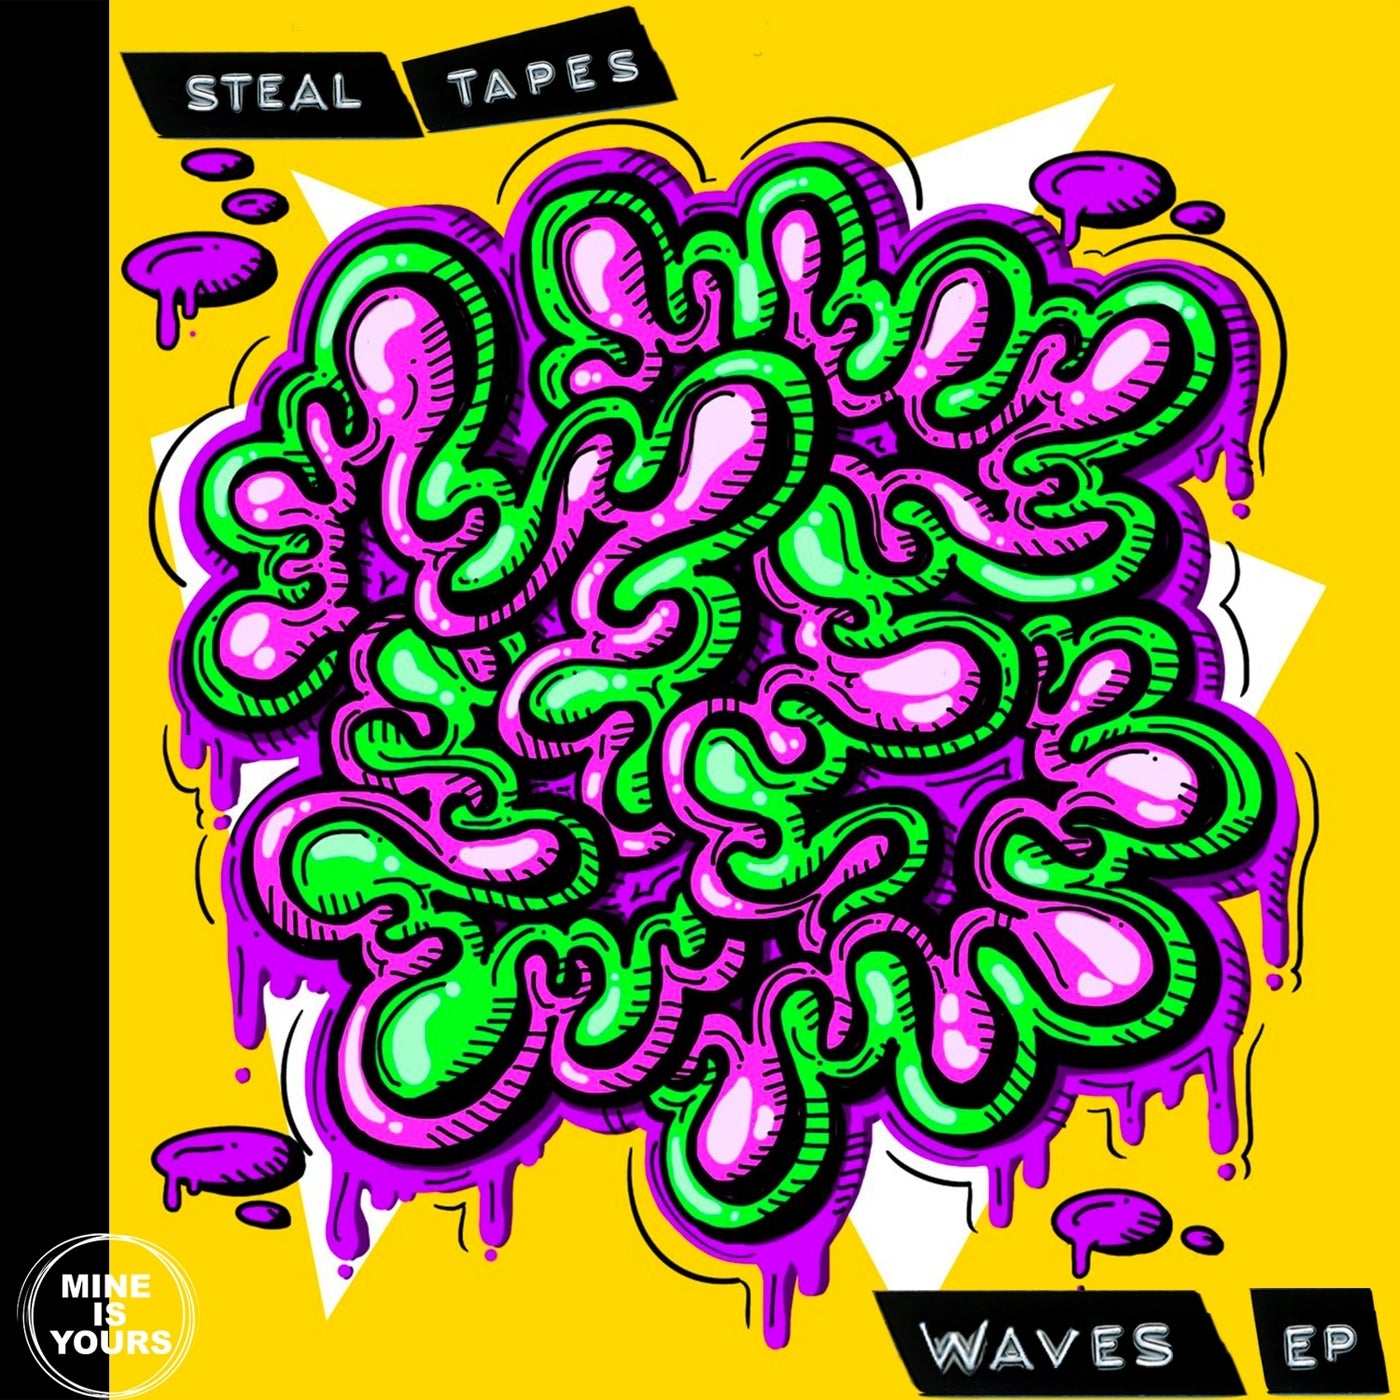 Steal Tapes – Waves Steal Tapes [MIY003]